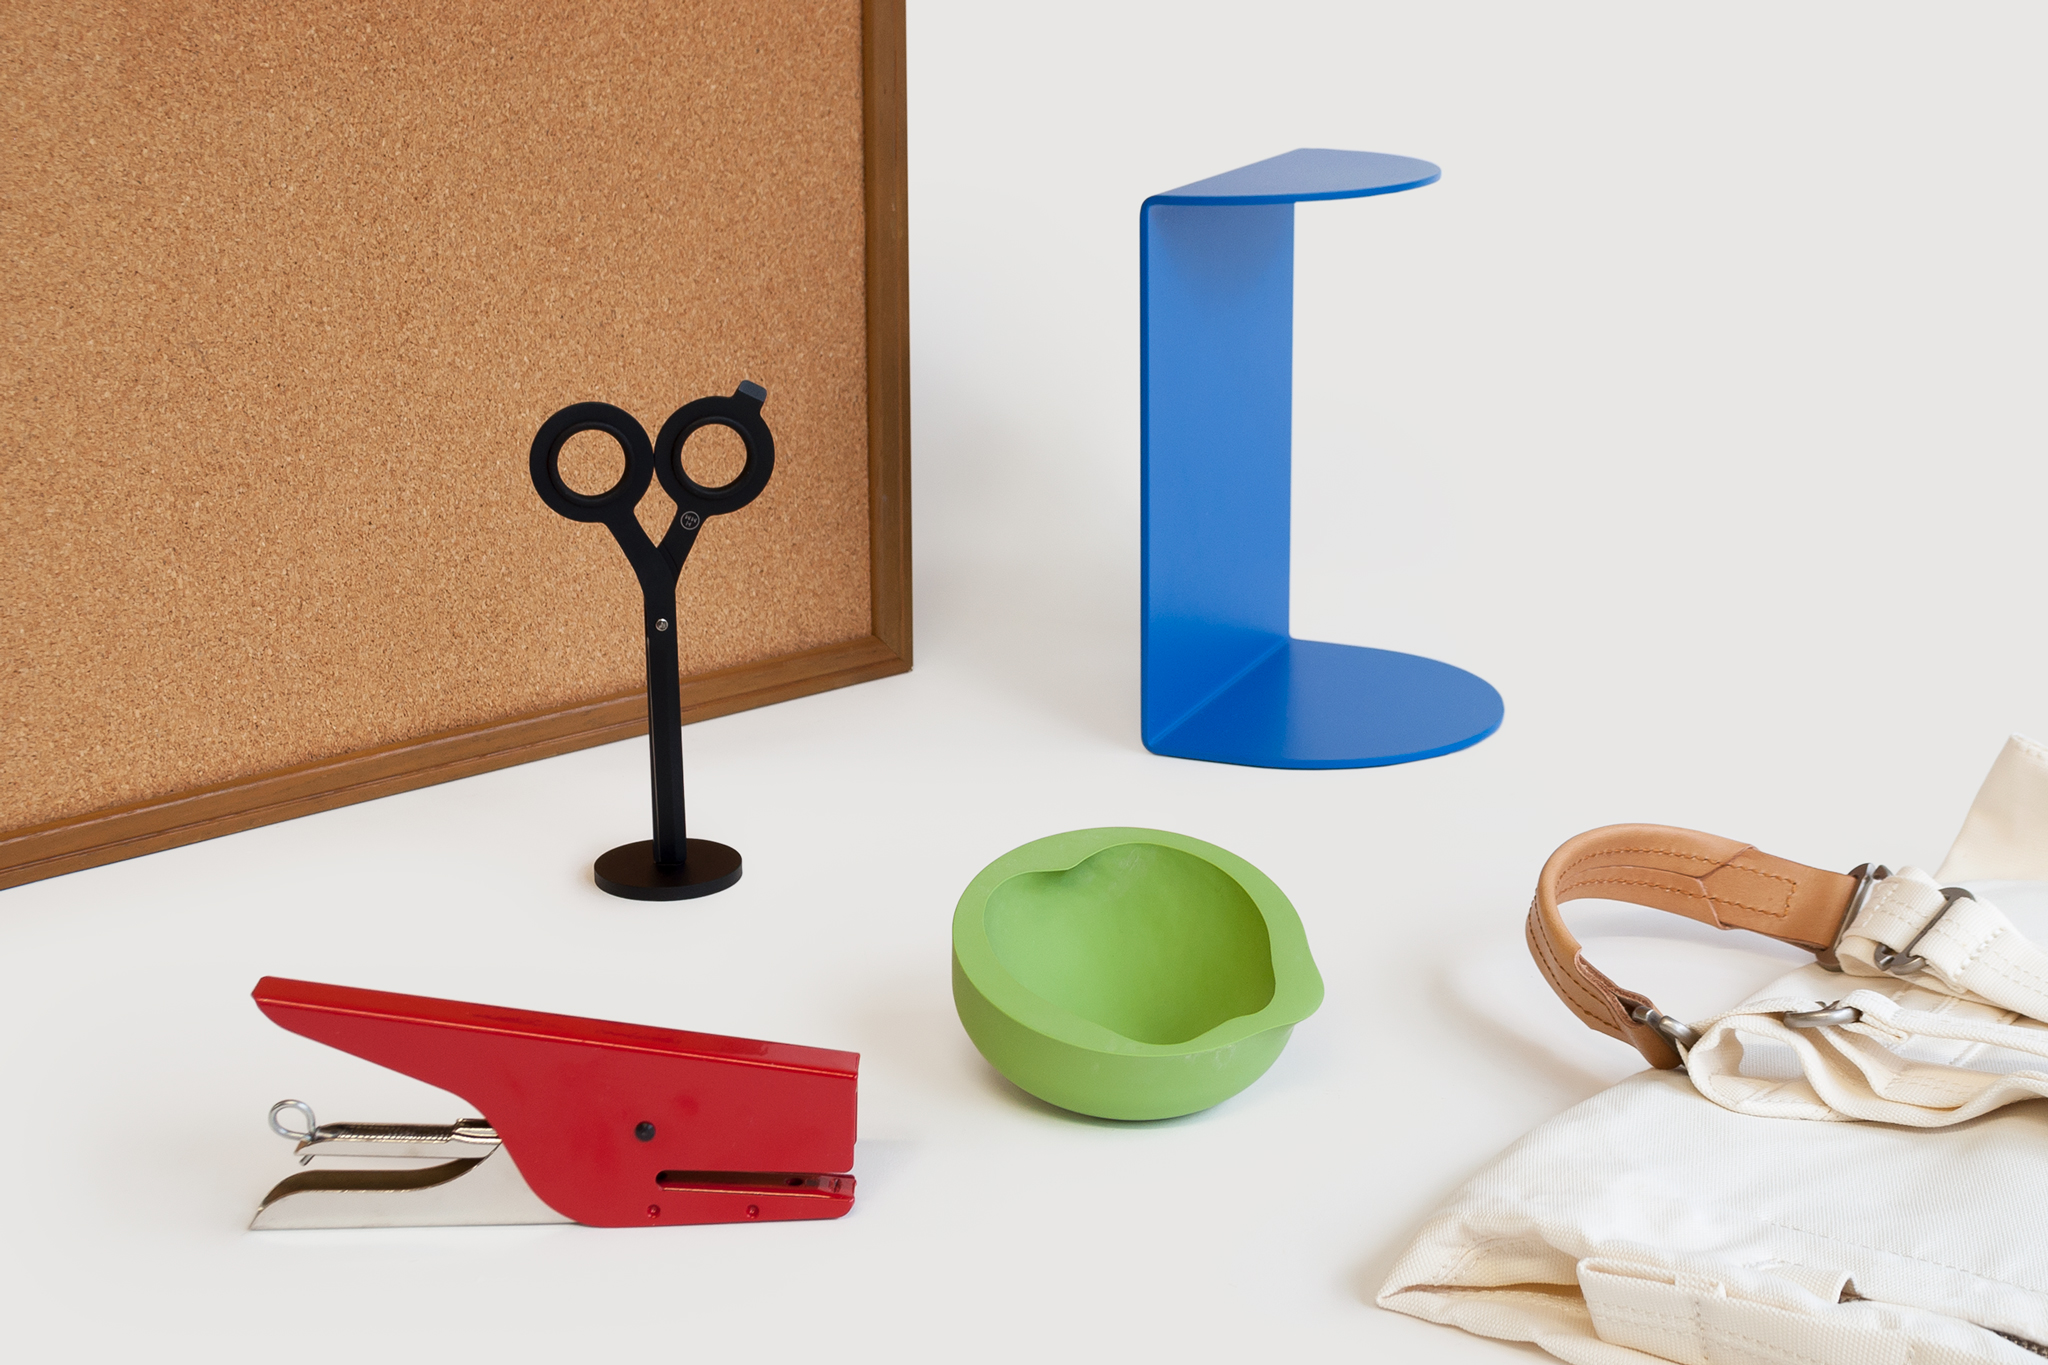 On a gray ground, a bulletin board stands upright behind a blue bookend, a red stapler, black standing scissors, a cream and brown leather backpack, and a green reverse molded apple vessel